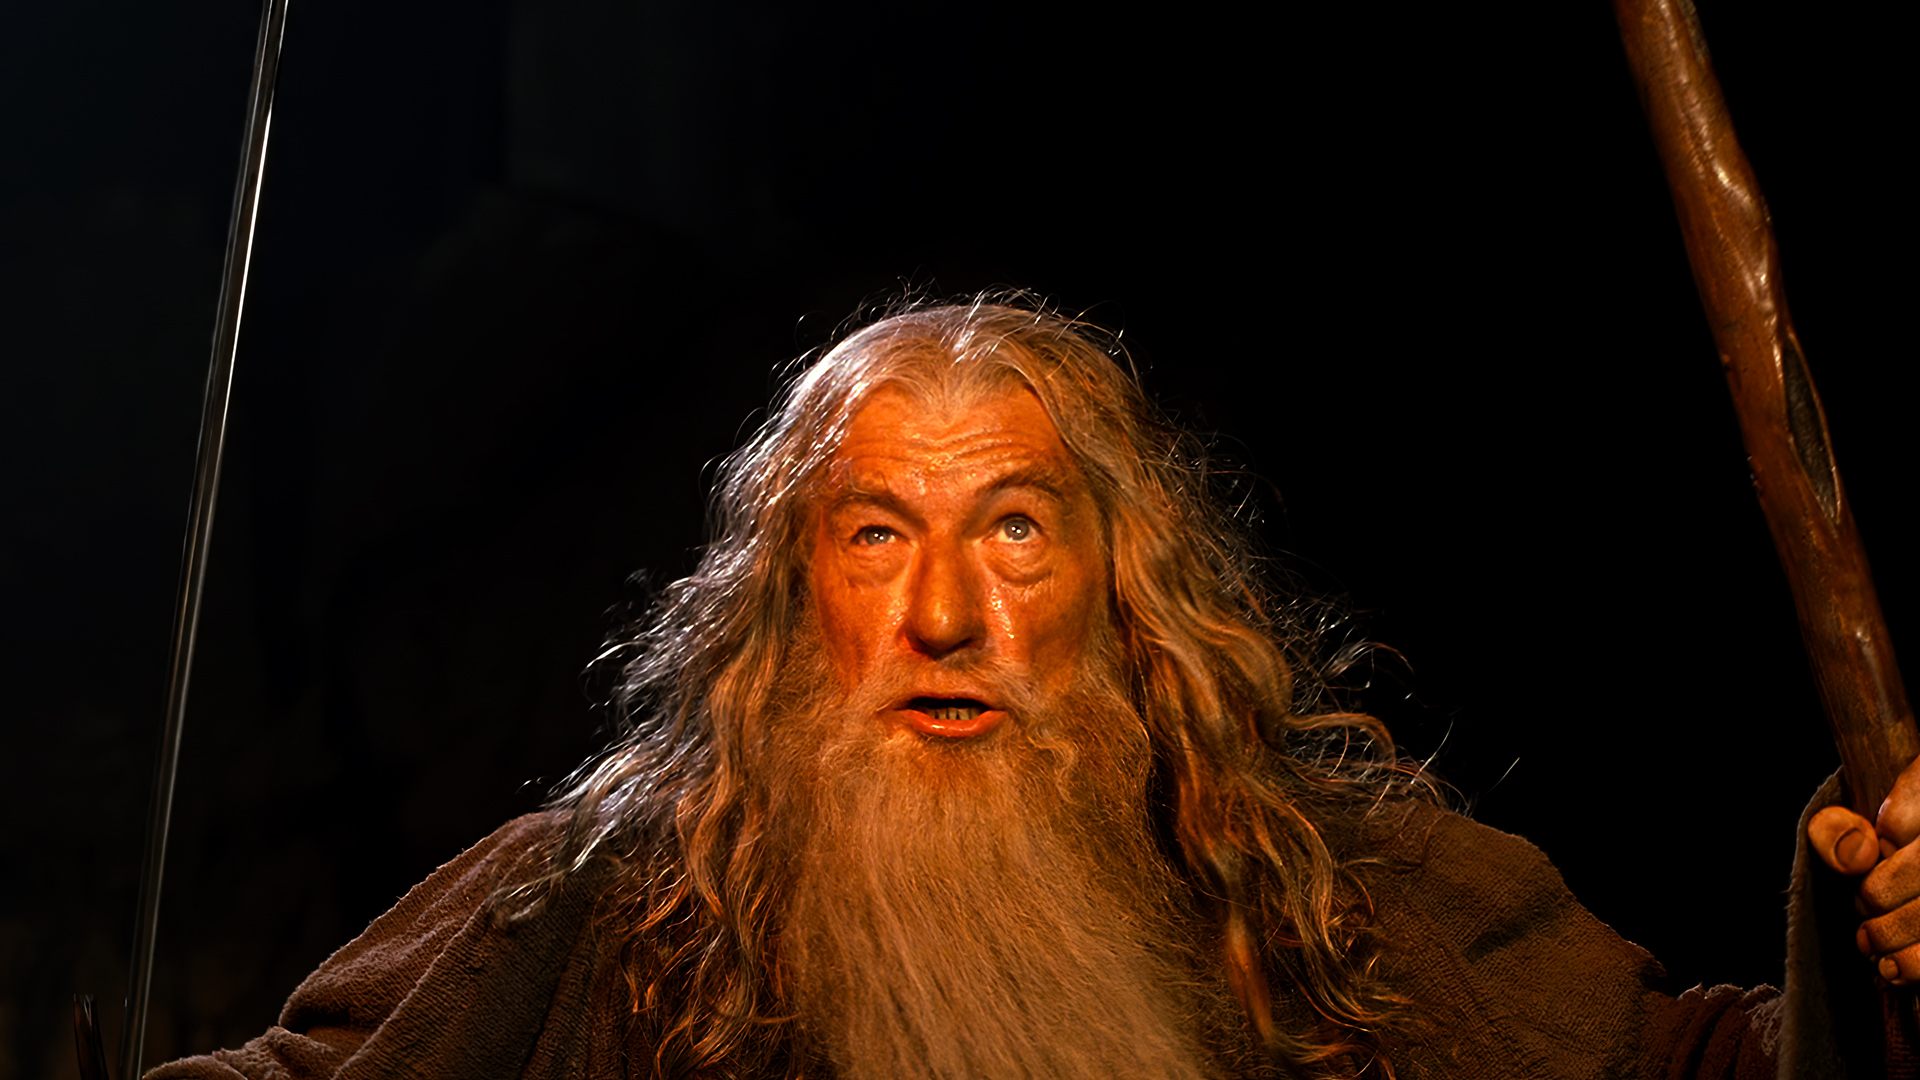 People 1920x1080 movies film stills Gandalf Ian McKellen actor wizard sword beard The Lord of the Rings: The Fellowship of the Ring